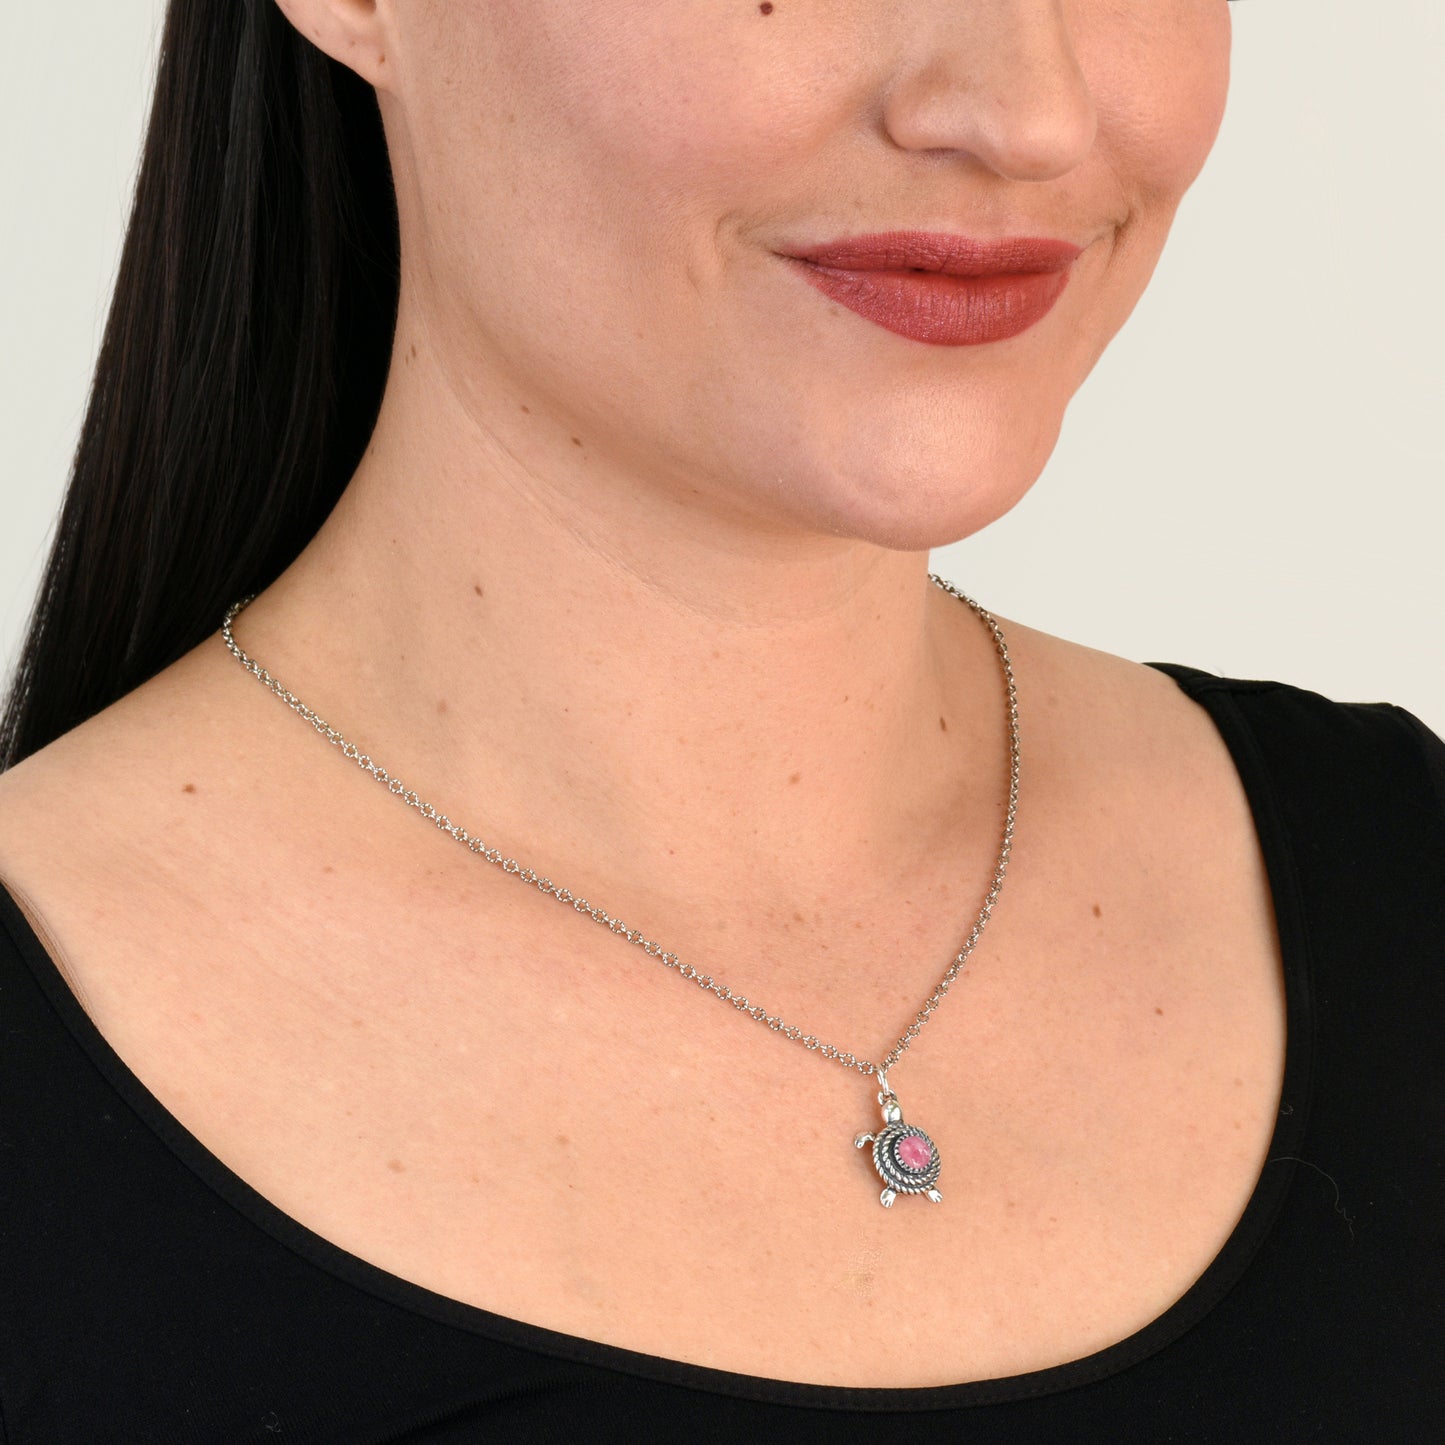 Southwestern Sterling Silver with Rhodonite Gemstone Turtle Design Pendant Necklace, 16-19 Inches